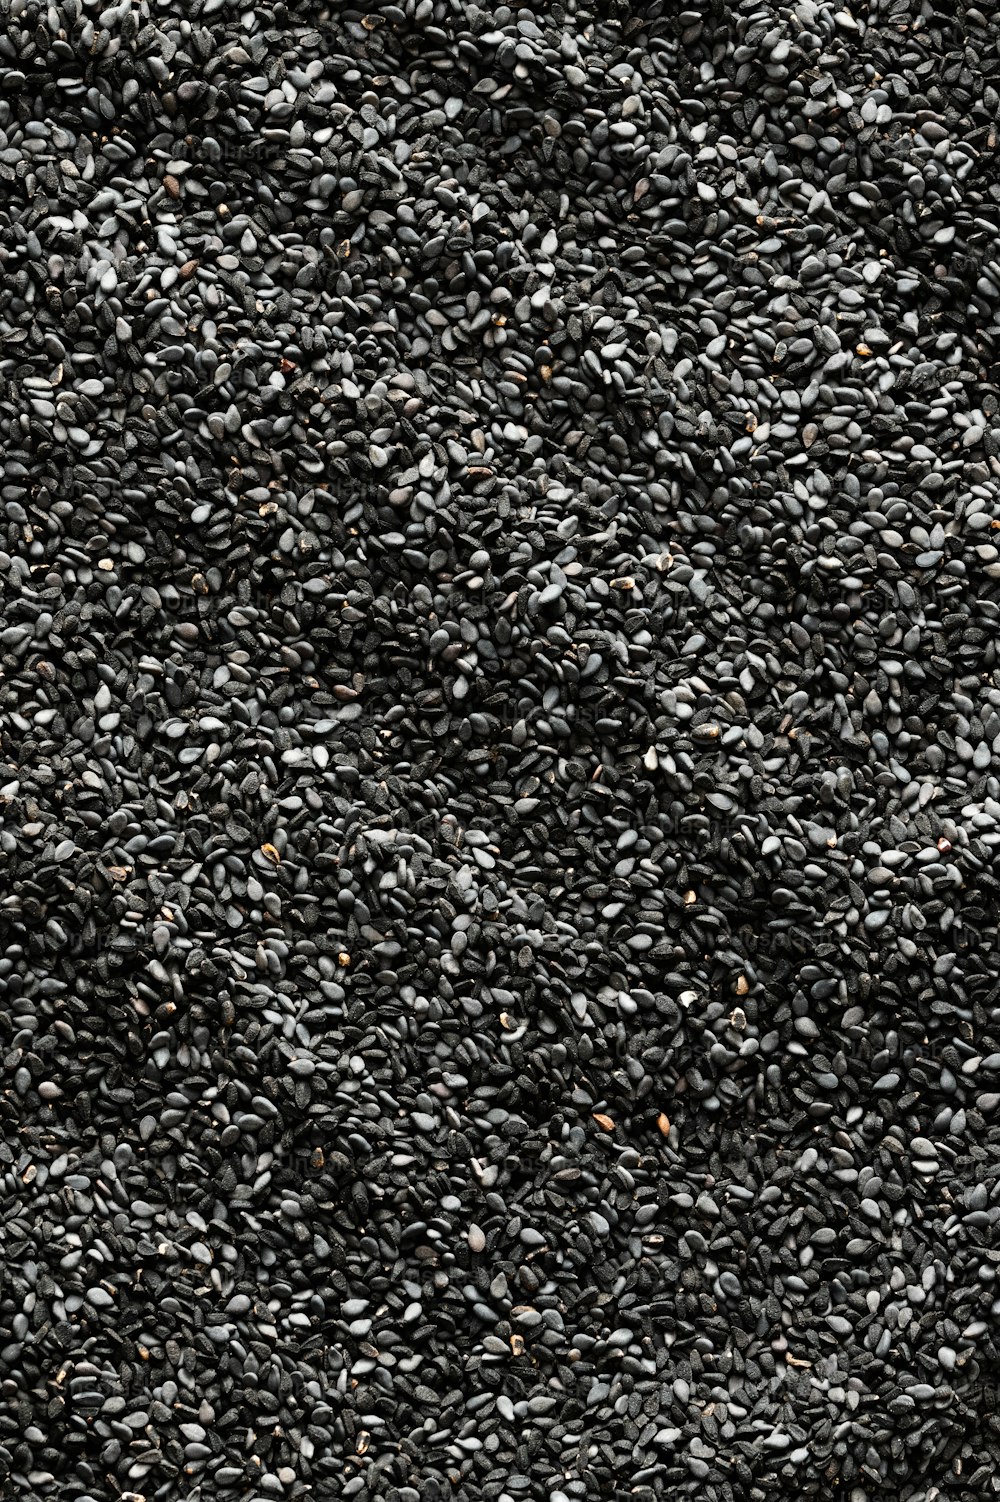 a pile of black sesame seeds on a white surface